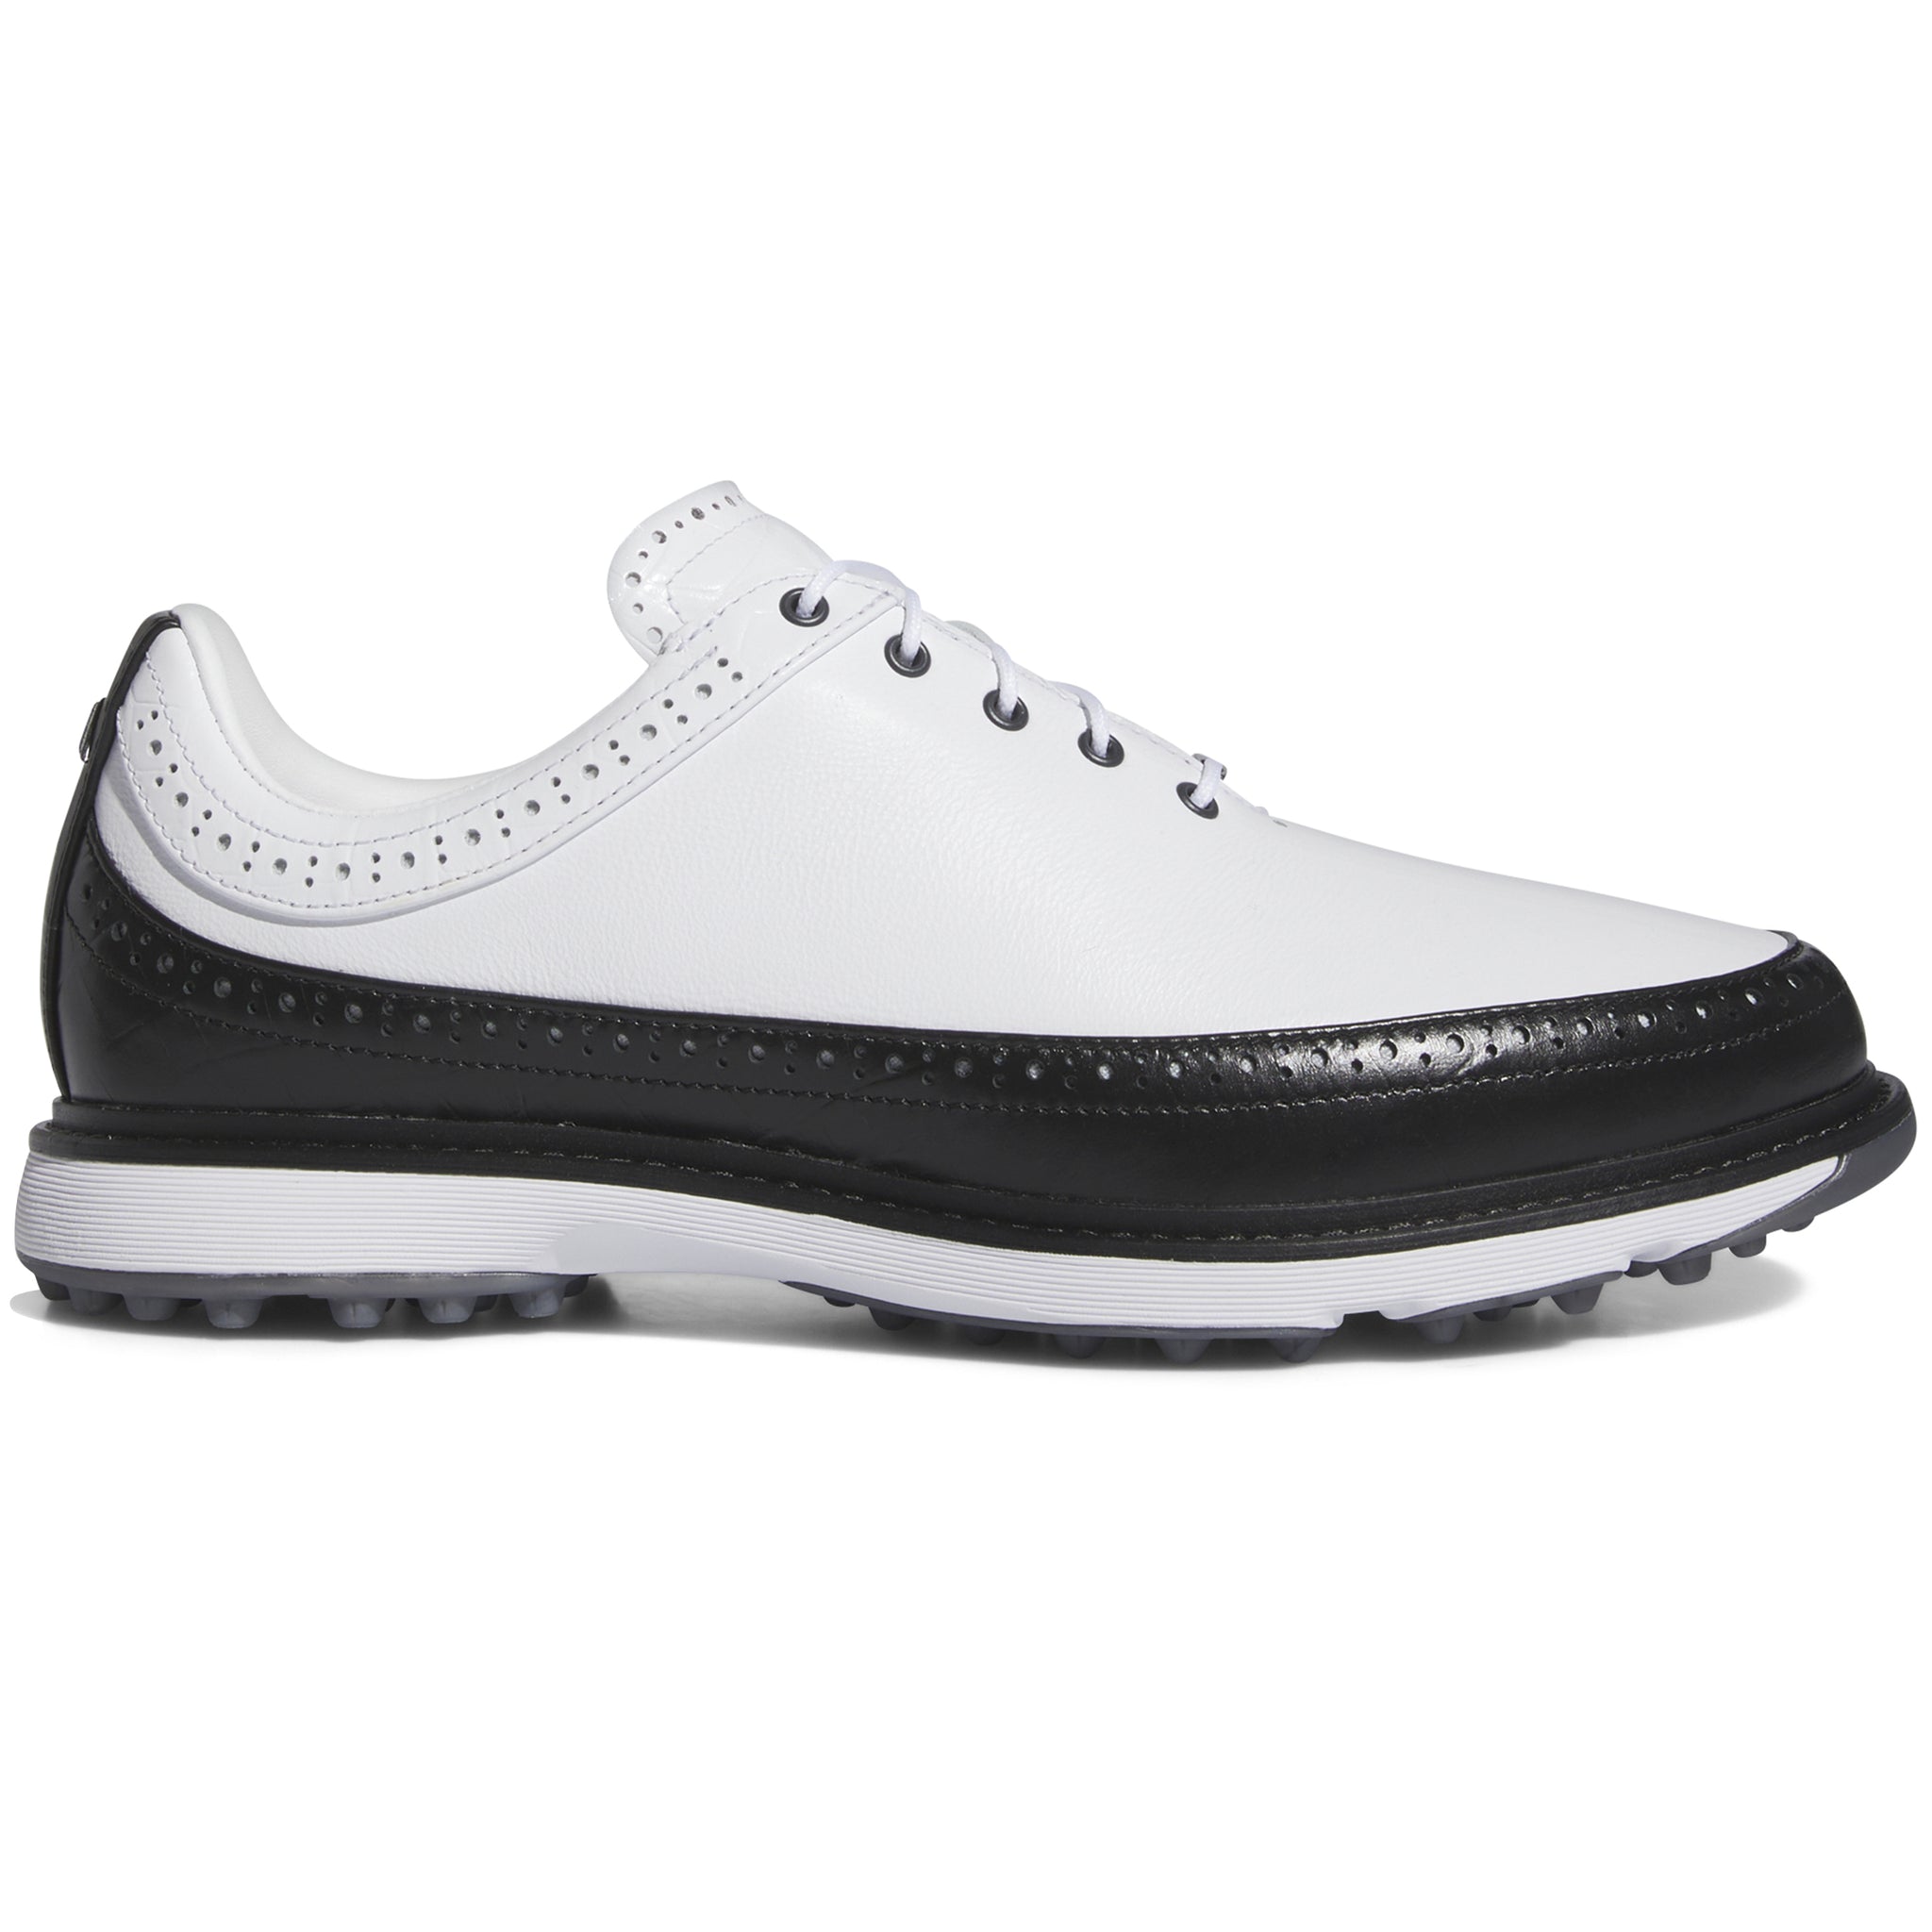 adidas MC80 Golf Shoes ID4750 White Core Black Bright Red | Function18 ...